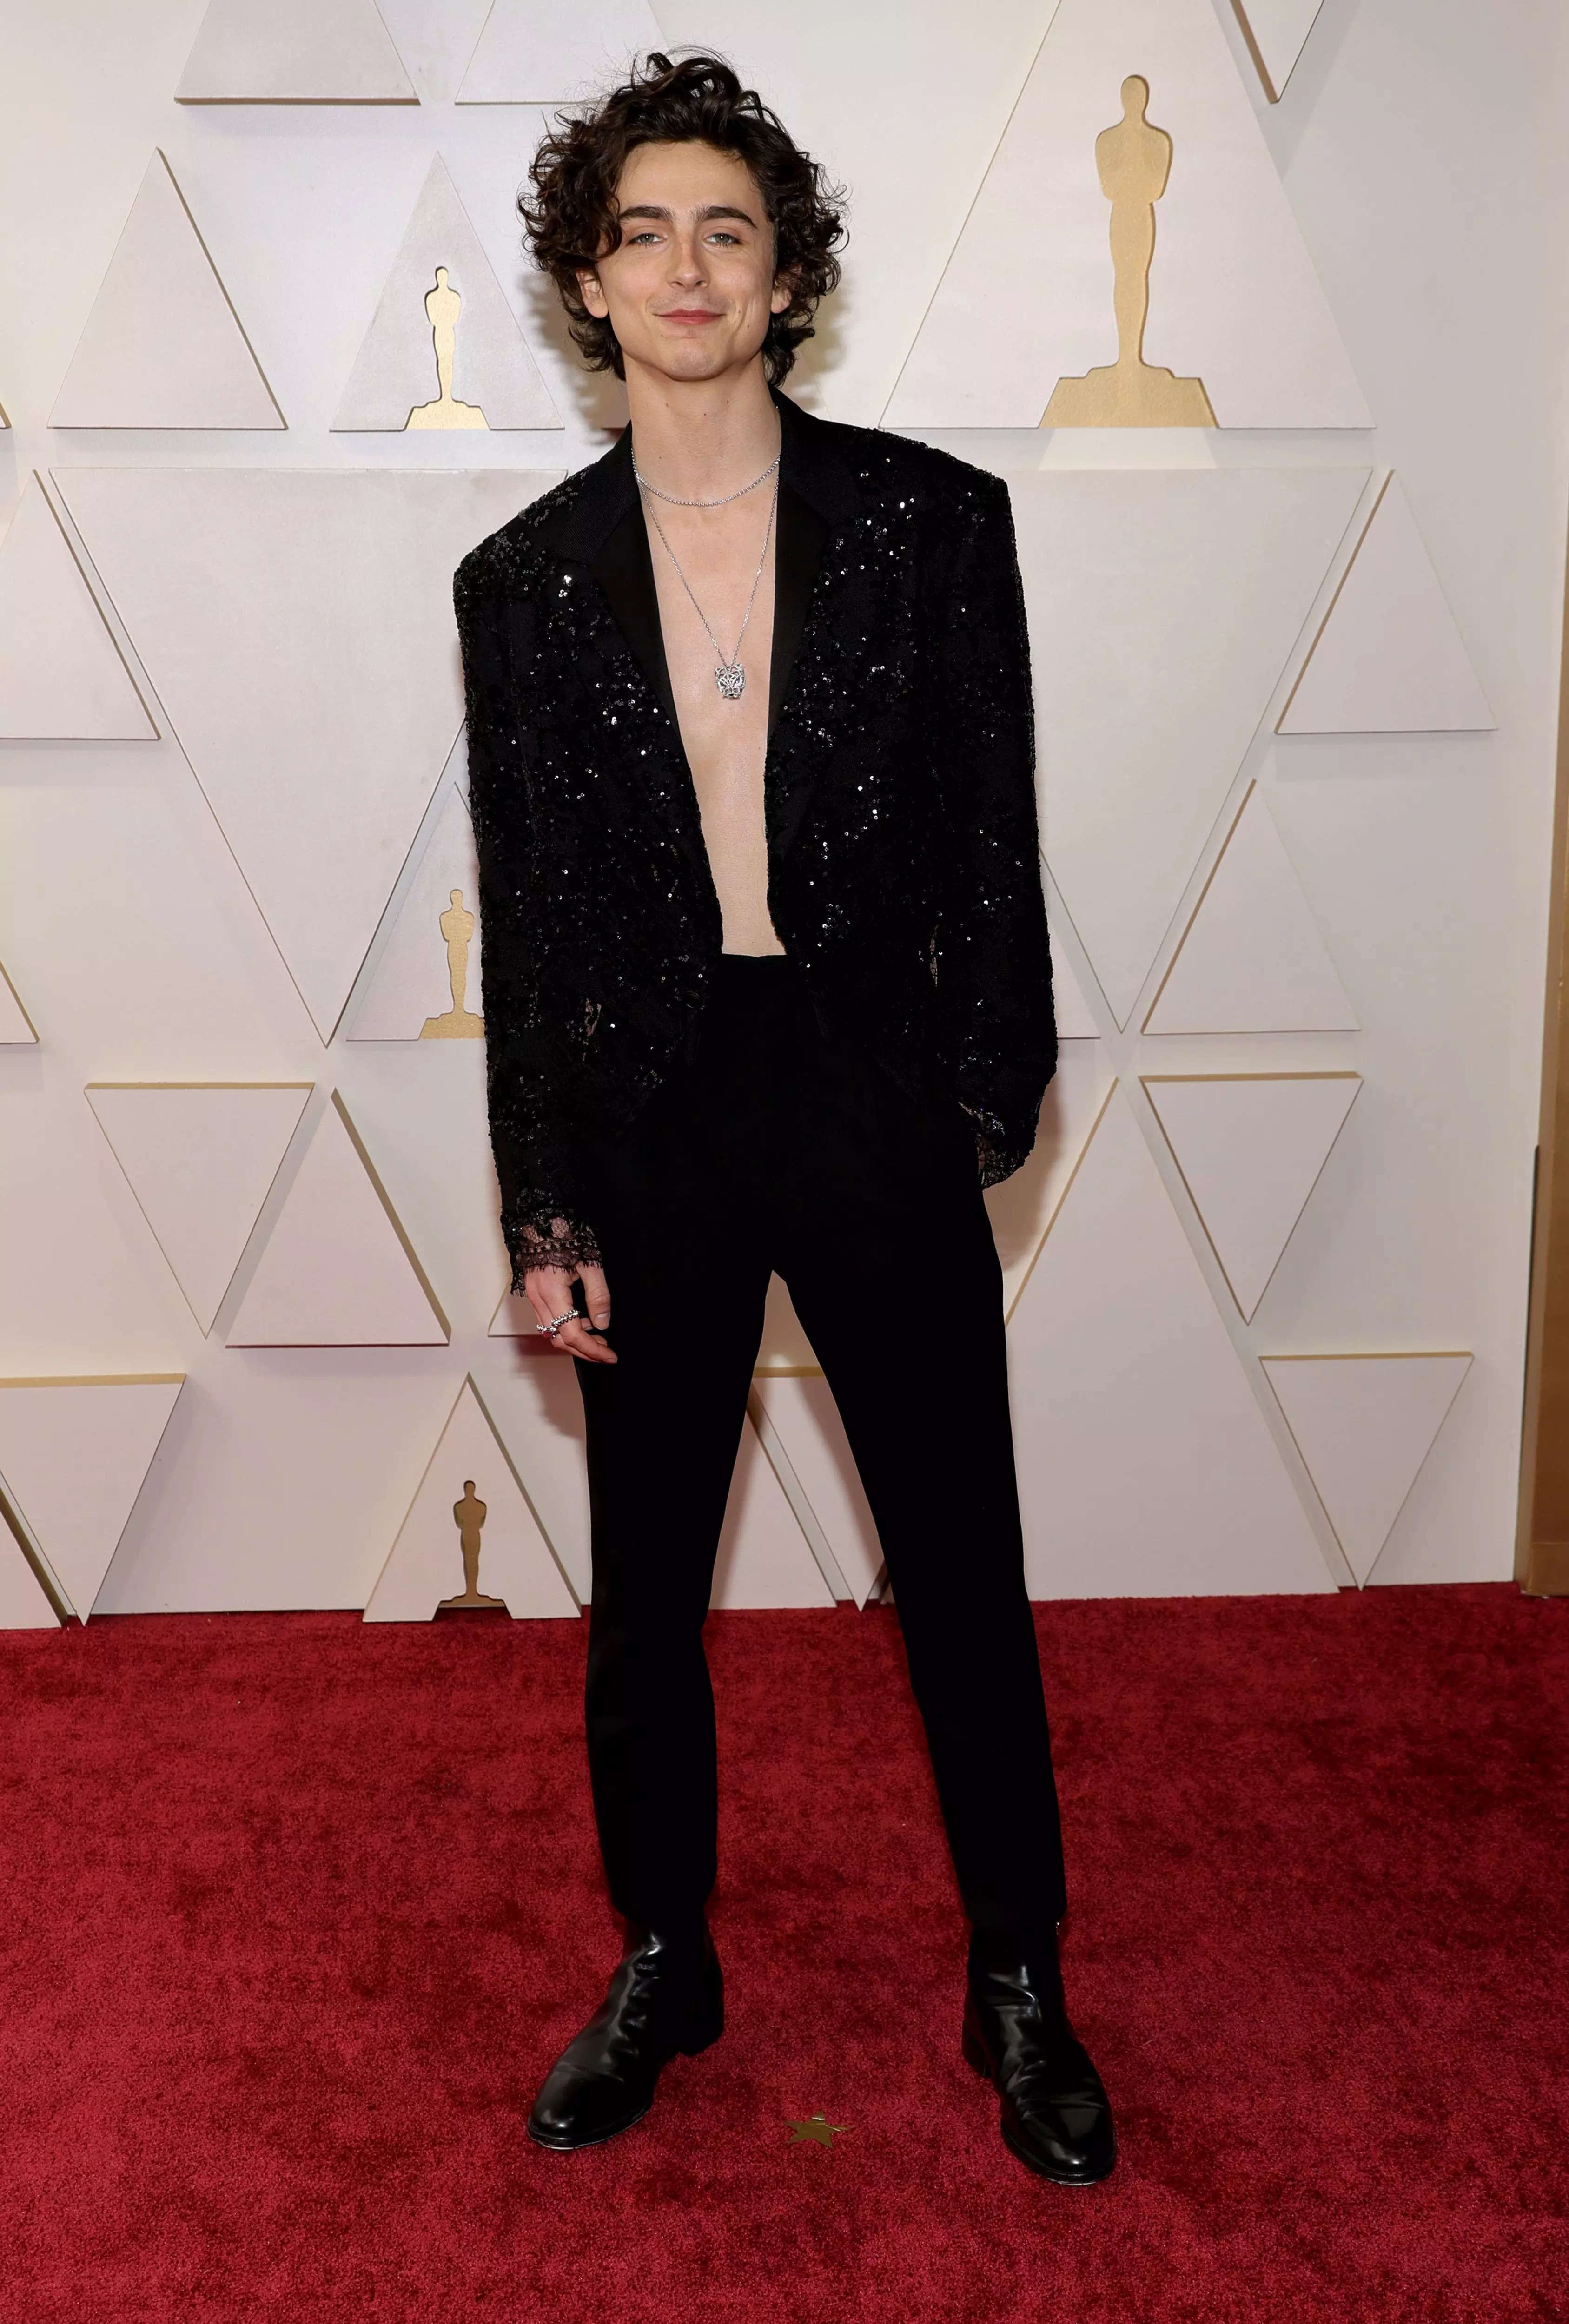 TImothee Chalamet's Most Daring Red-Carpet Looks From the Last 8 Years